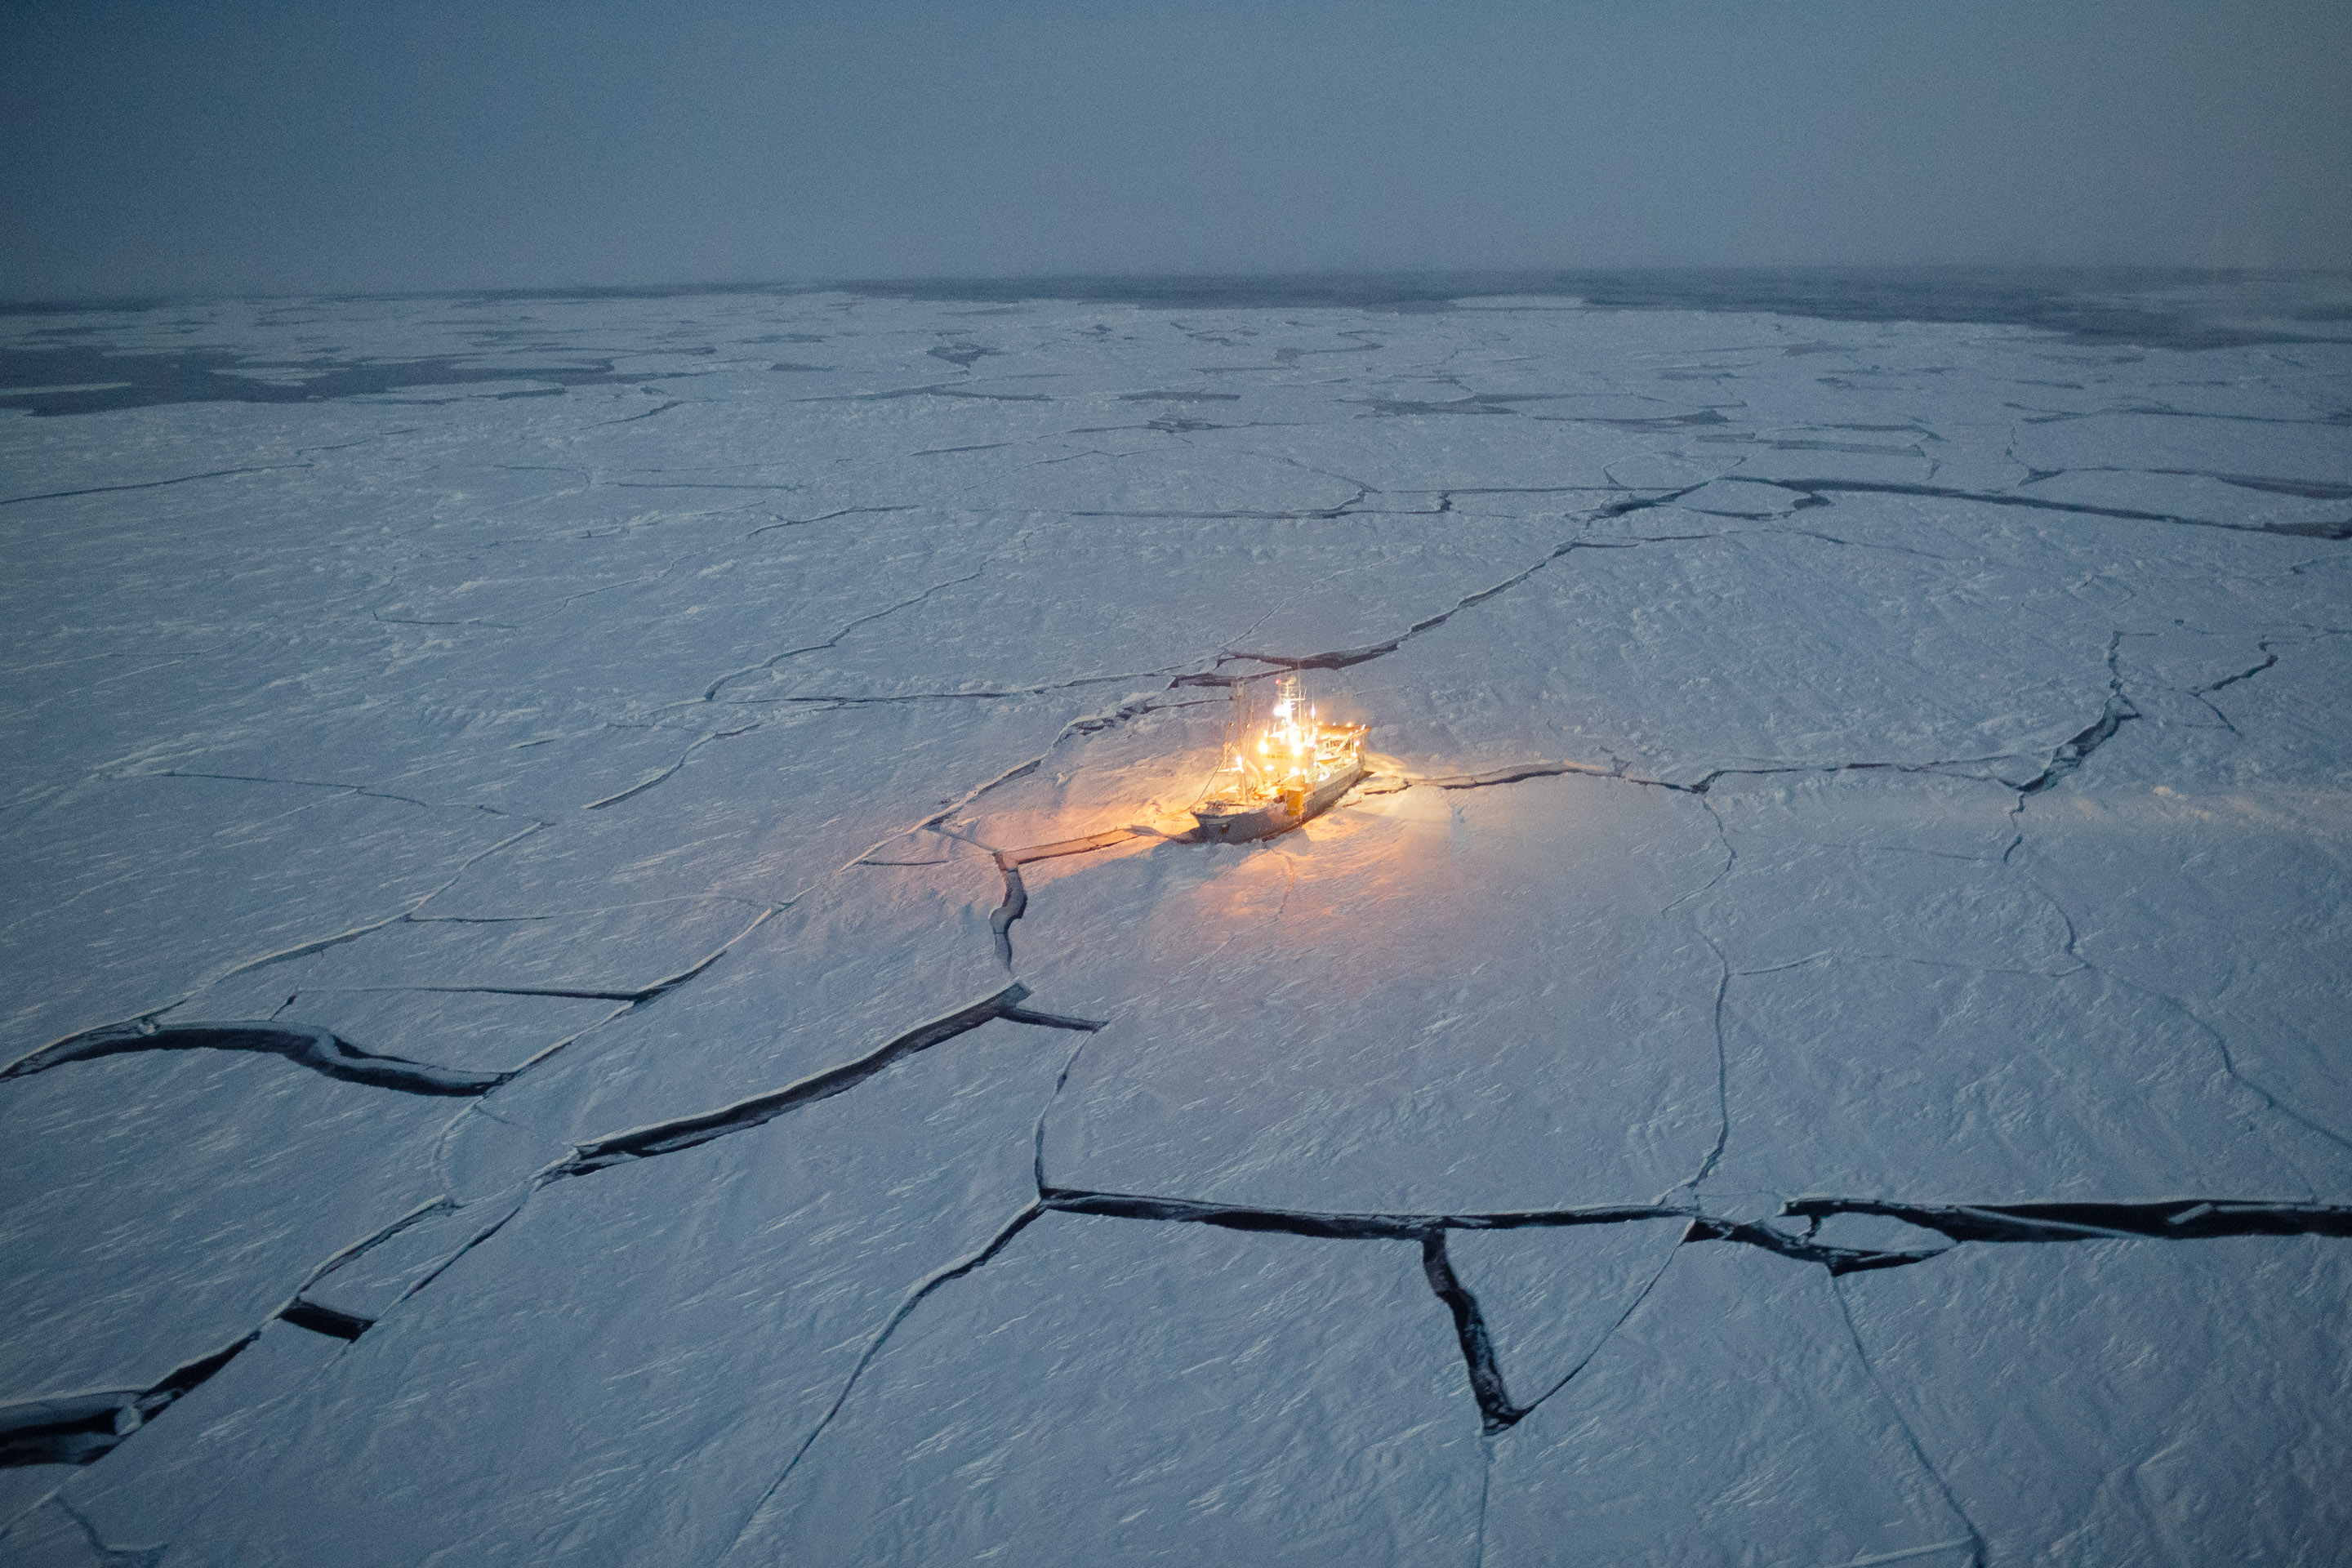 Leads in the Arctic sea ice can be seen separating ice floes from one-another in this photo shot from a helicopter as it was approaching the Lance. (Source: Nick Cobbing/Norwegian Polar Institute)